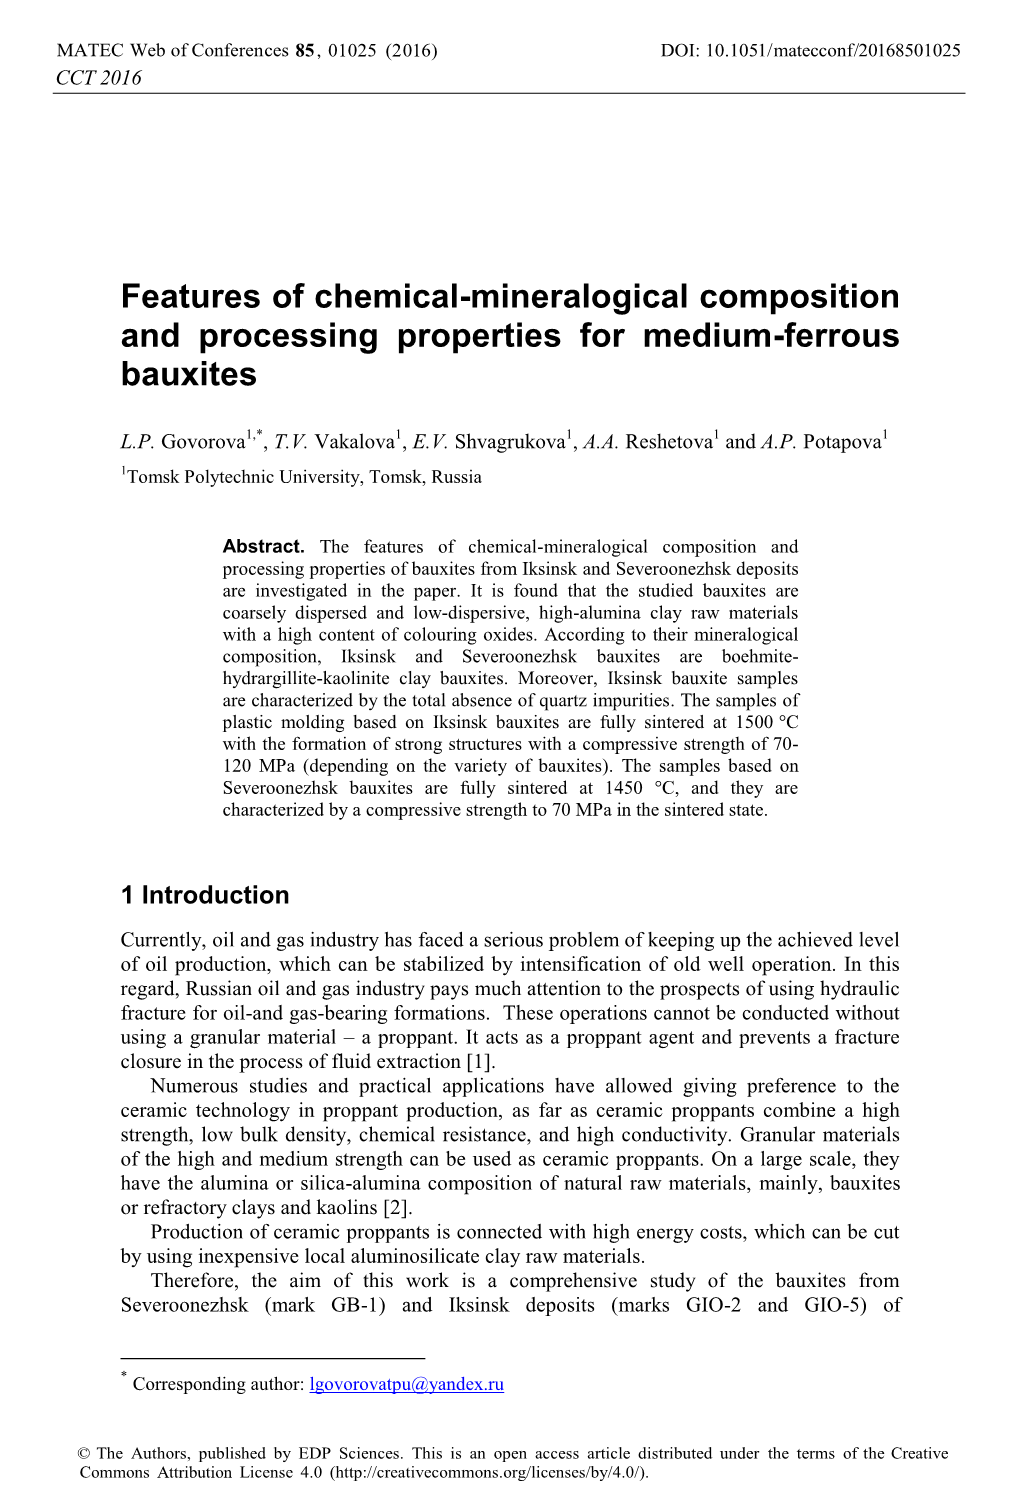 Features of Chemical-Mineralogical Composition and Processing Properties for Medium-Ferrous Bauxites